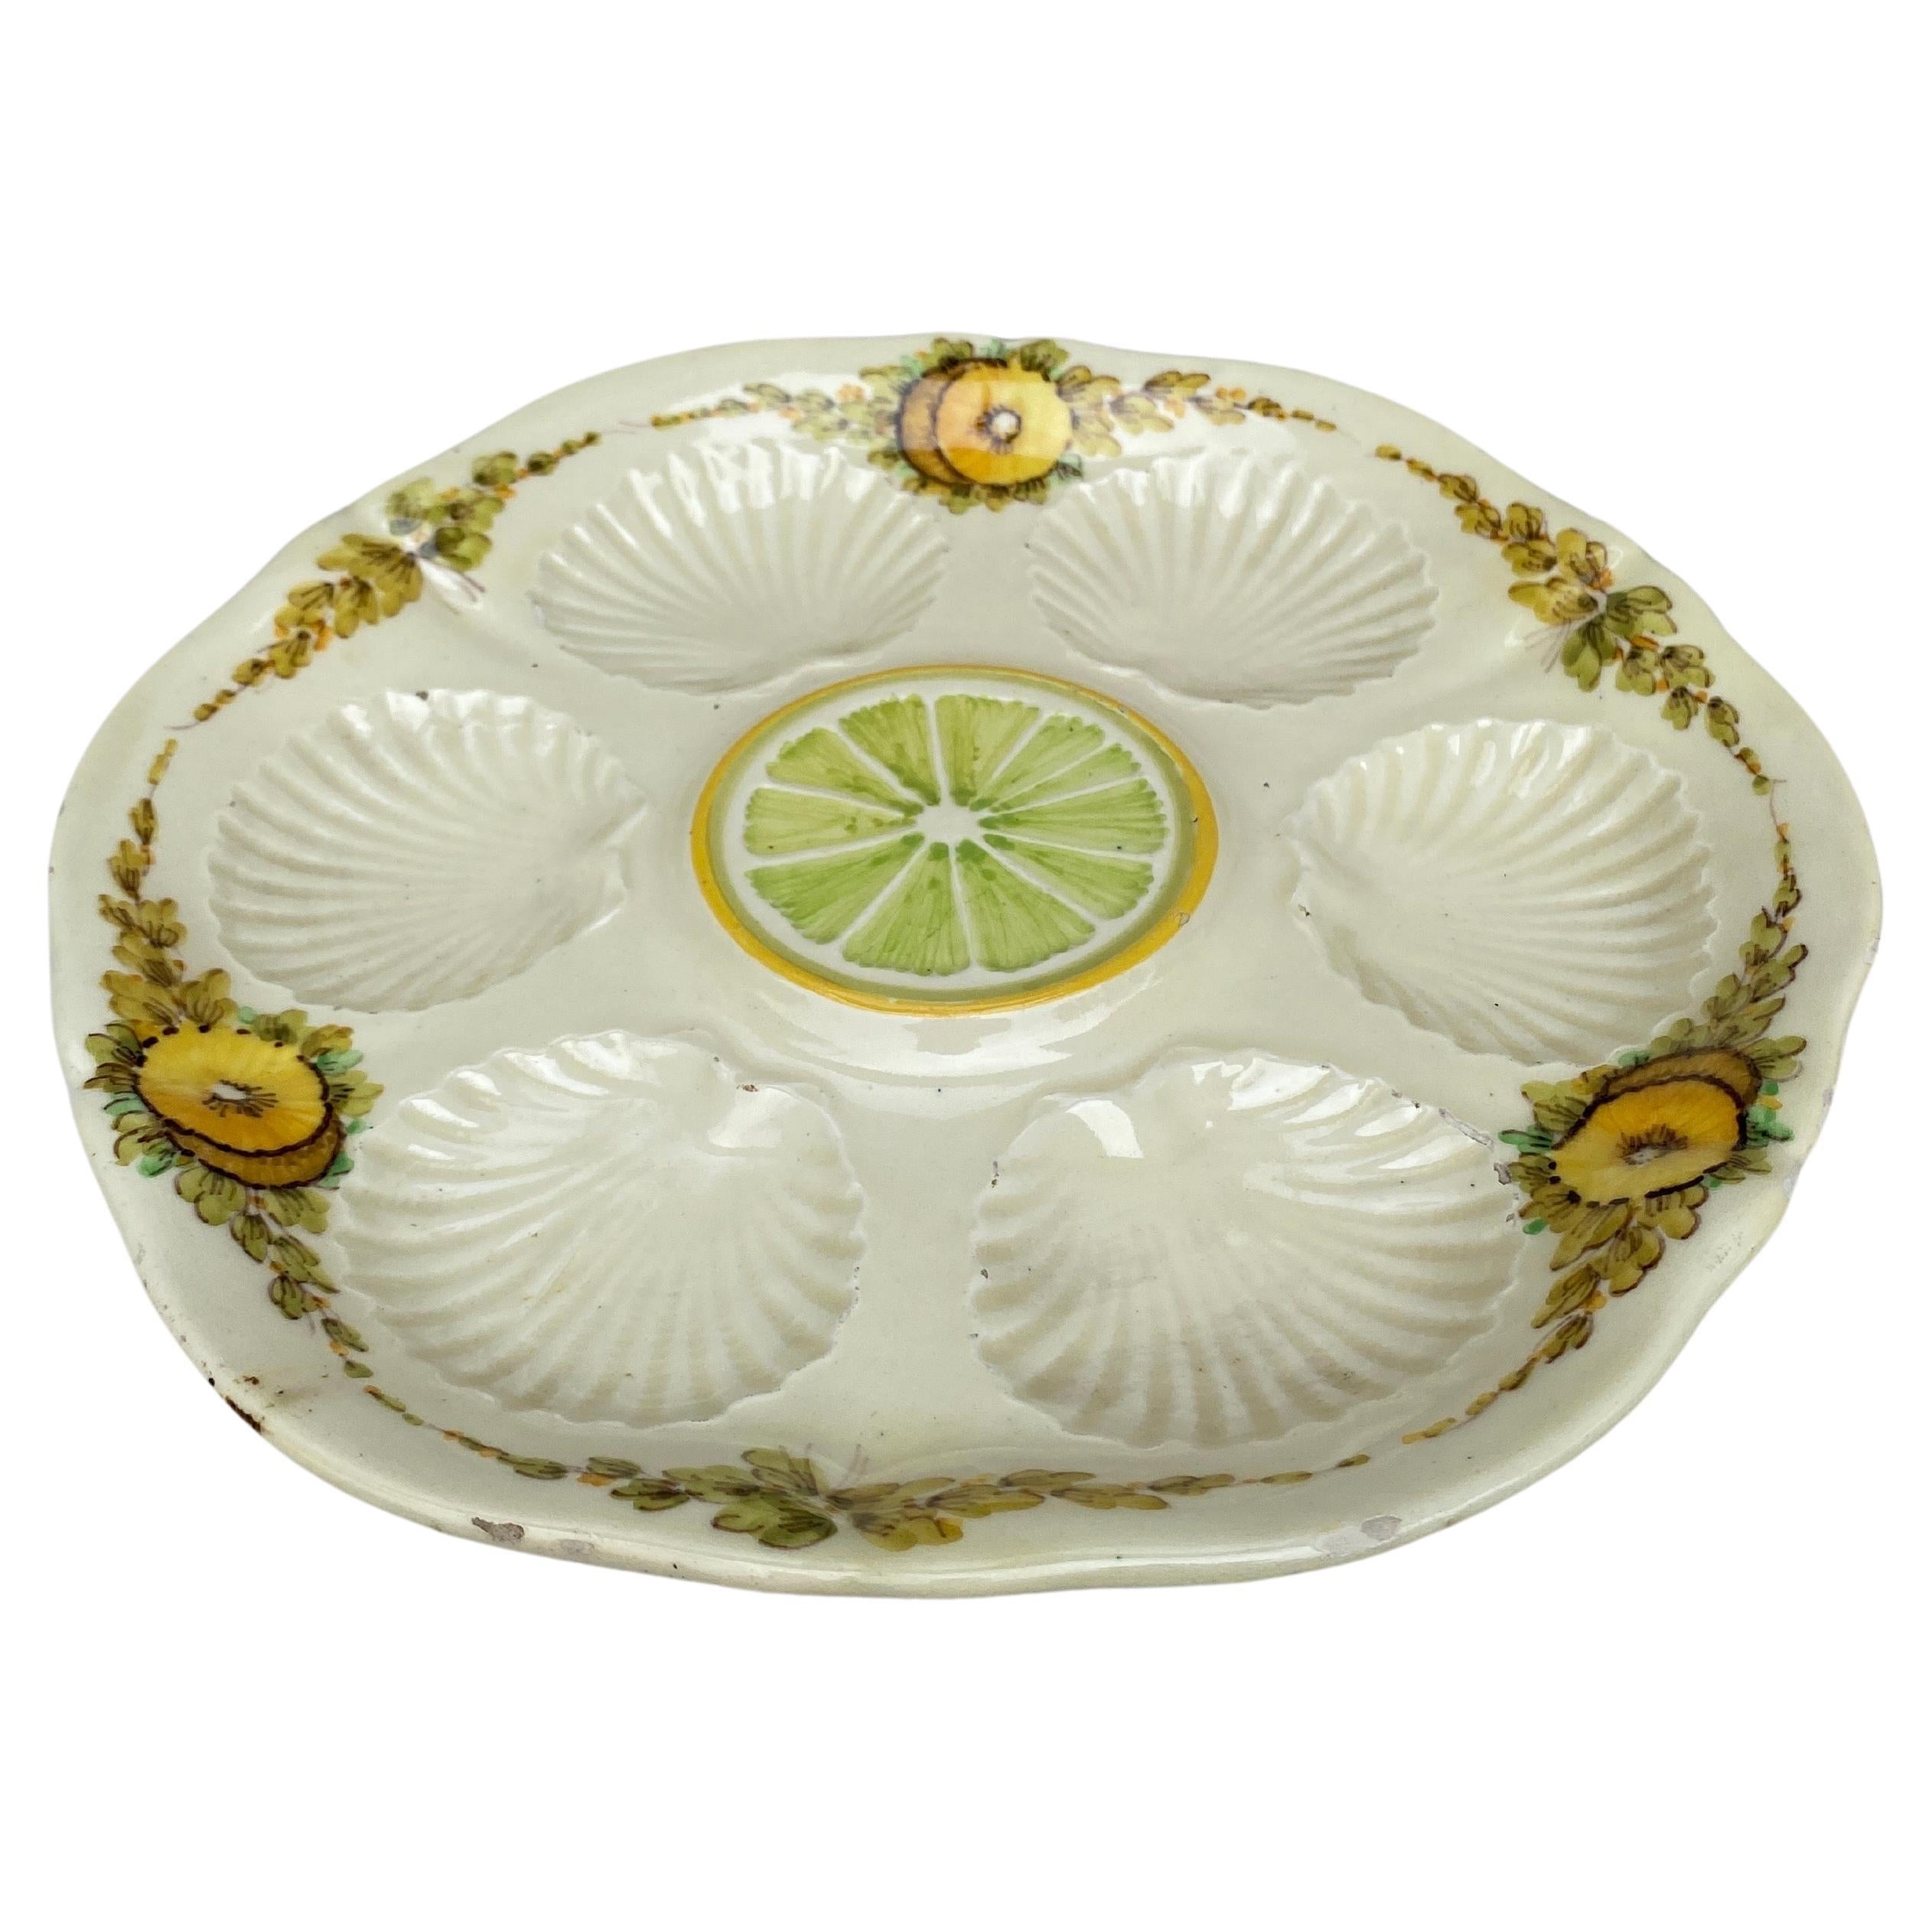 Unusual French Majolica oyster plate with yellow flowers and lemon on the center, circa 1890.